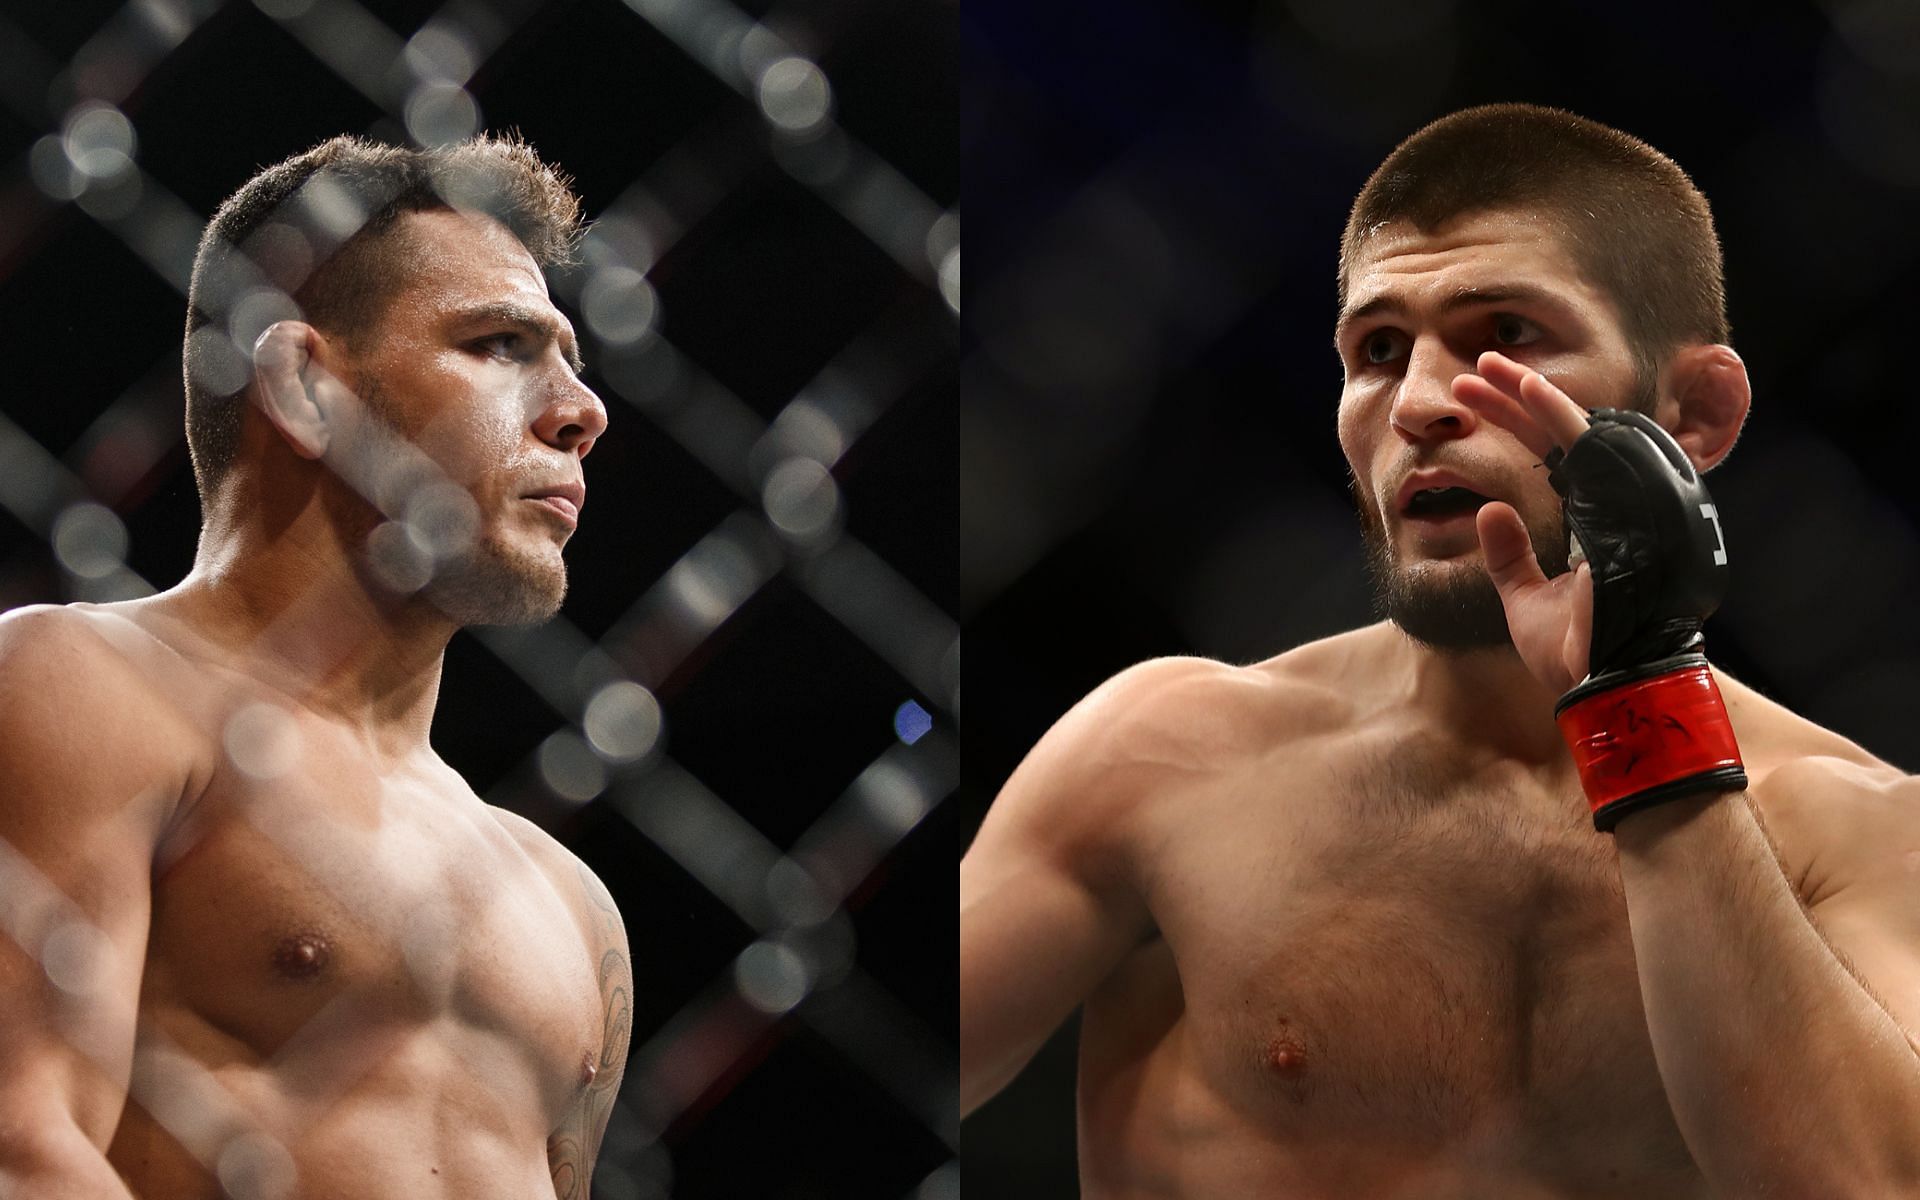 Rafael dos Anjos (L) believes he could have done with a better fight camp for his fight against Khabib Nurmagomedov (R) back in 2014